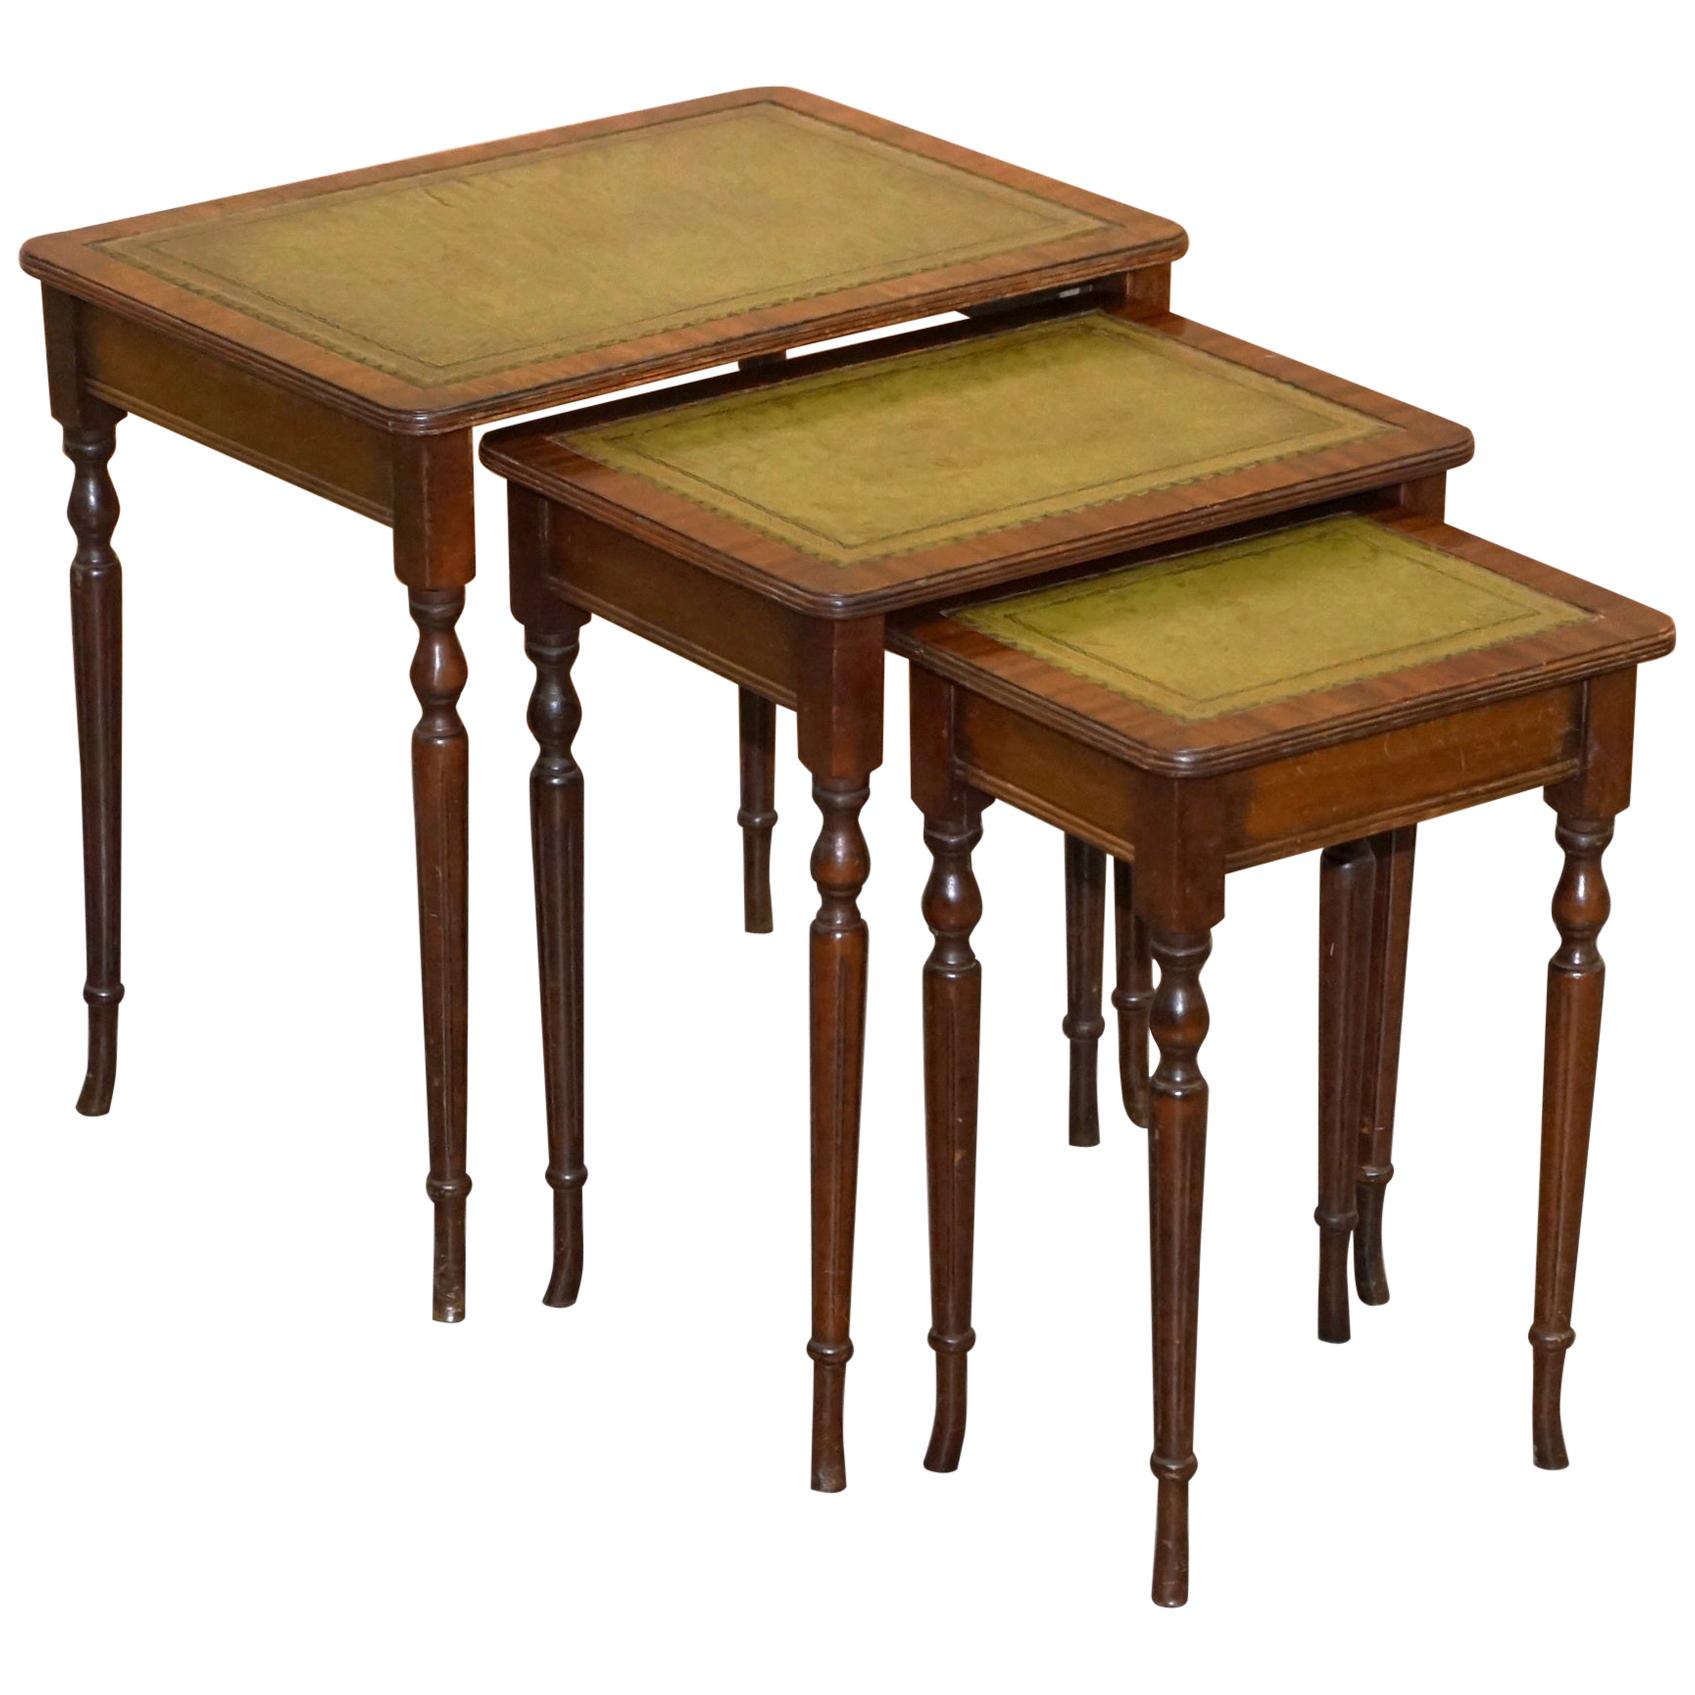 Nest of Three Flamed Mahogany Green Leather Top & Gold Leaf Embossed Side Tables